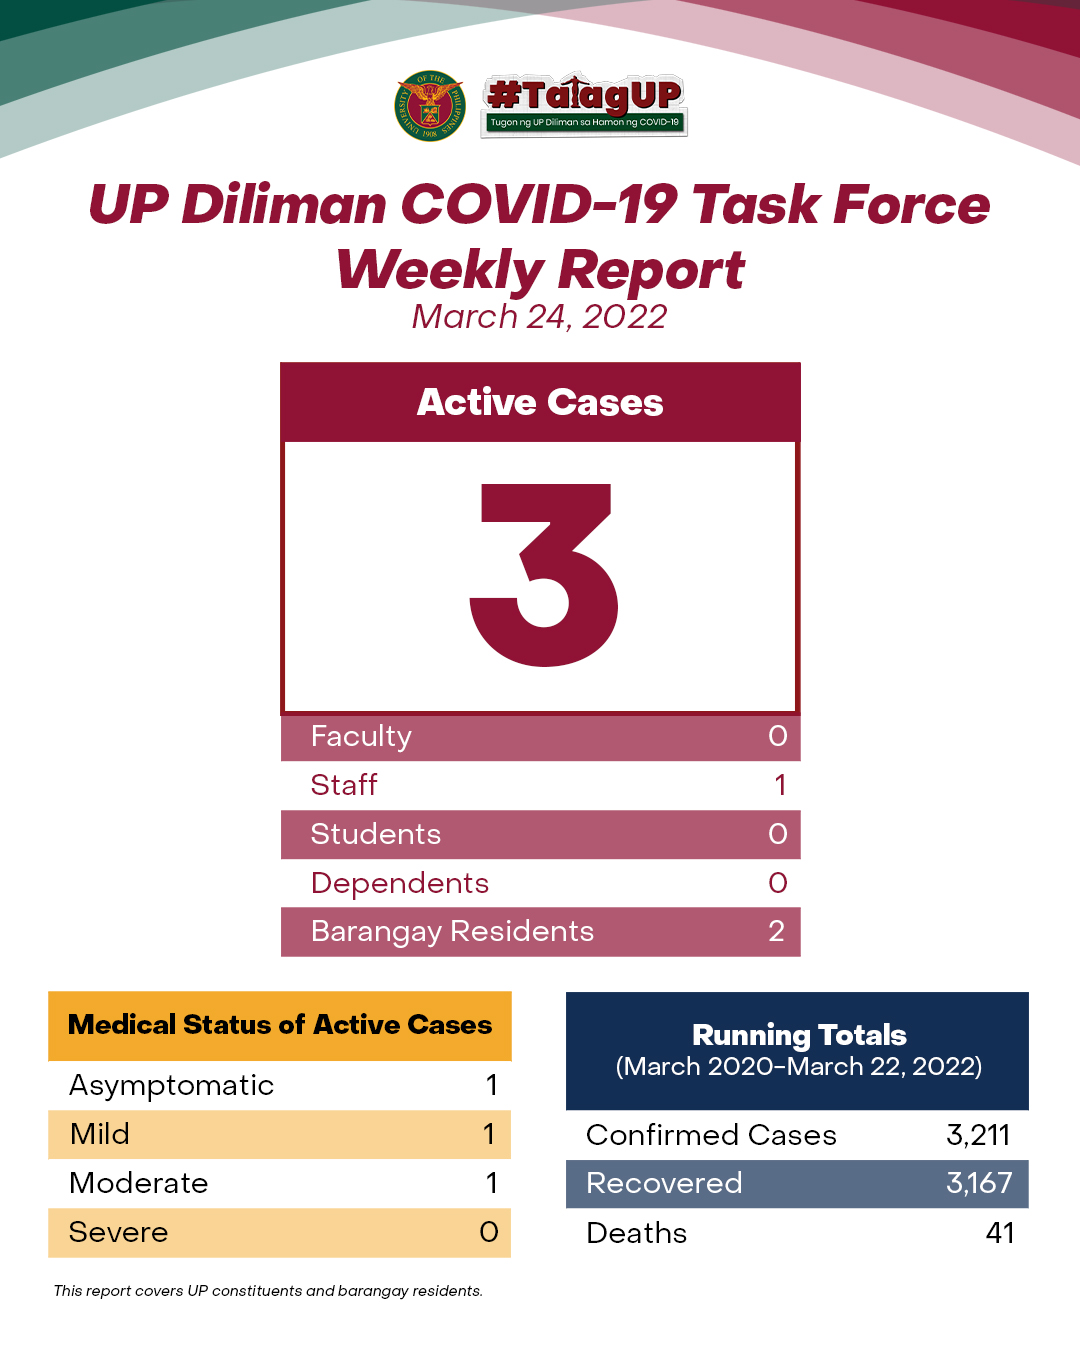 UP Diliman COVID-19 Task Force Weekly Report (March 24, 2022)